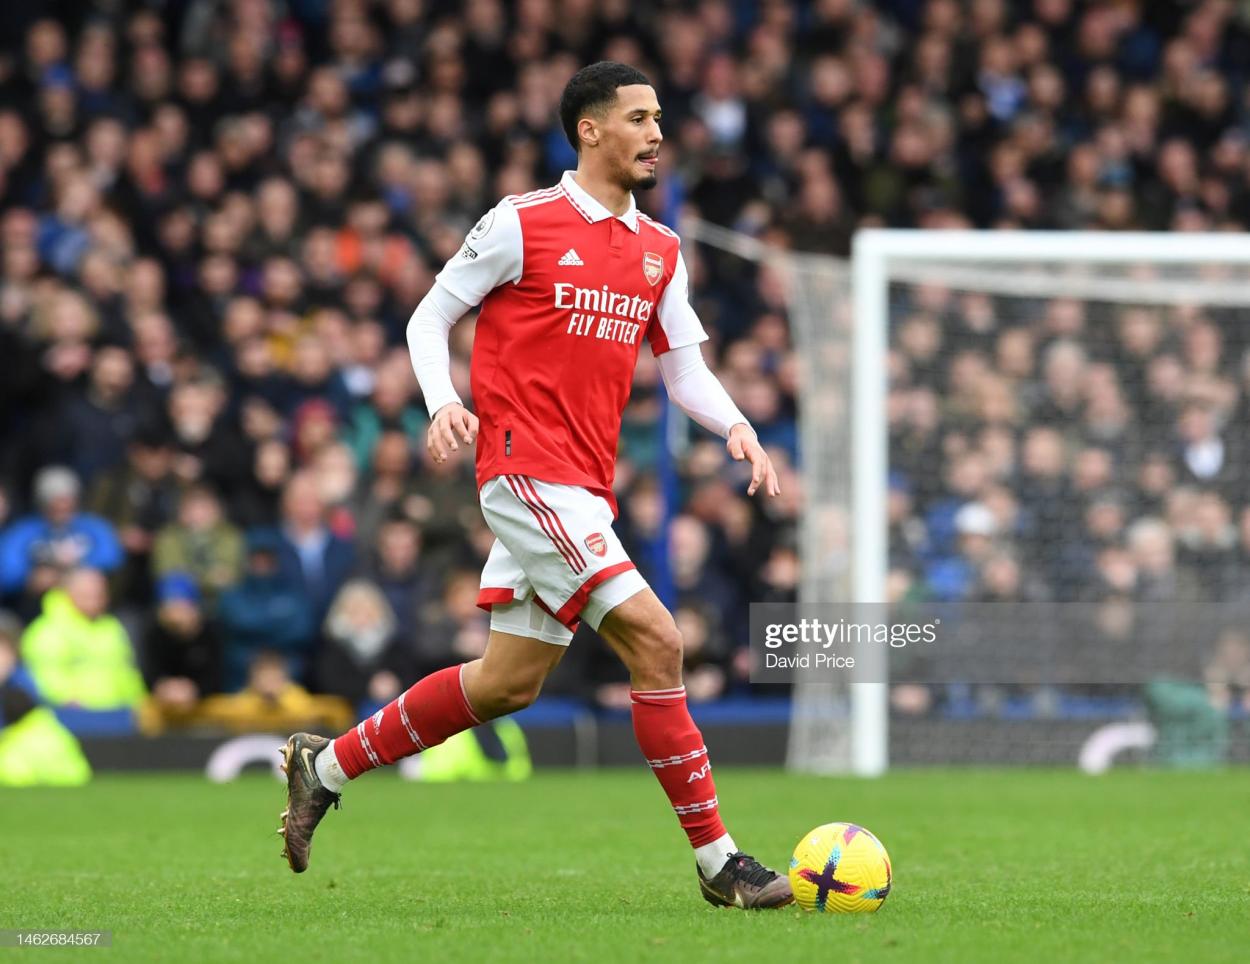 Photo by David Price/Arsenal FC via Getty Images